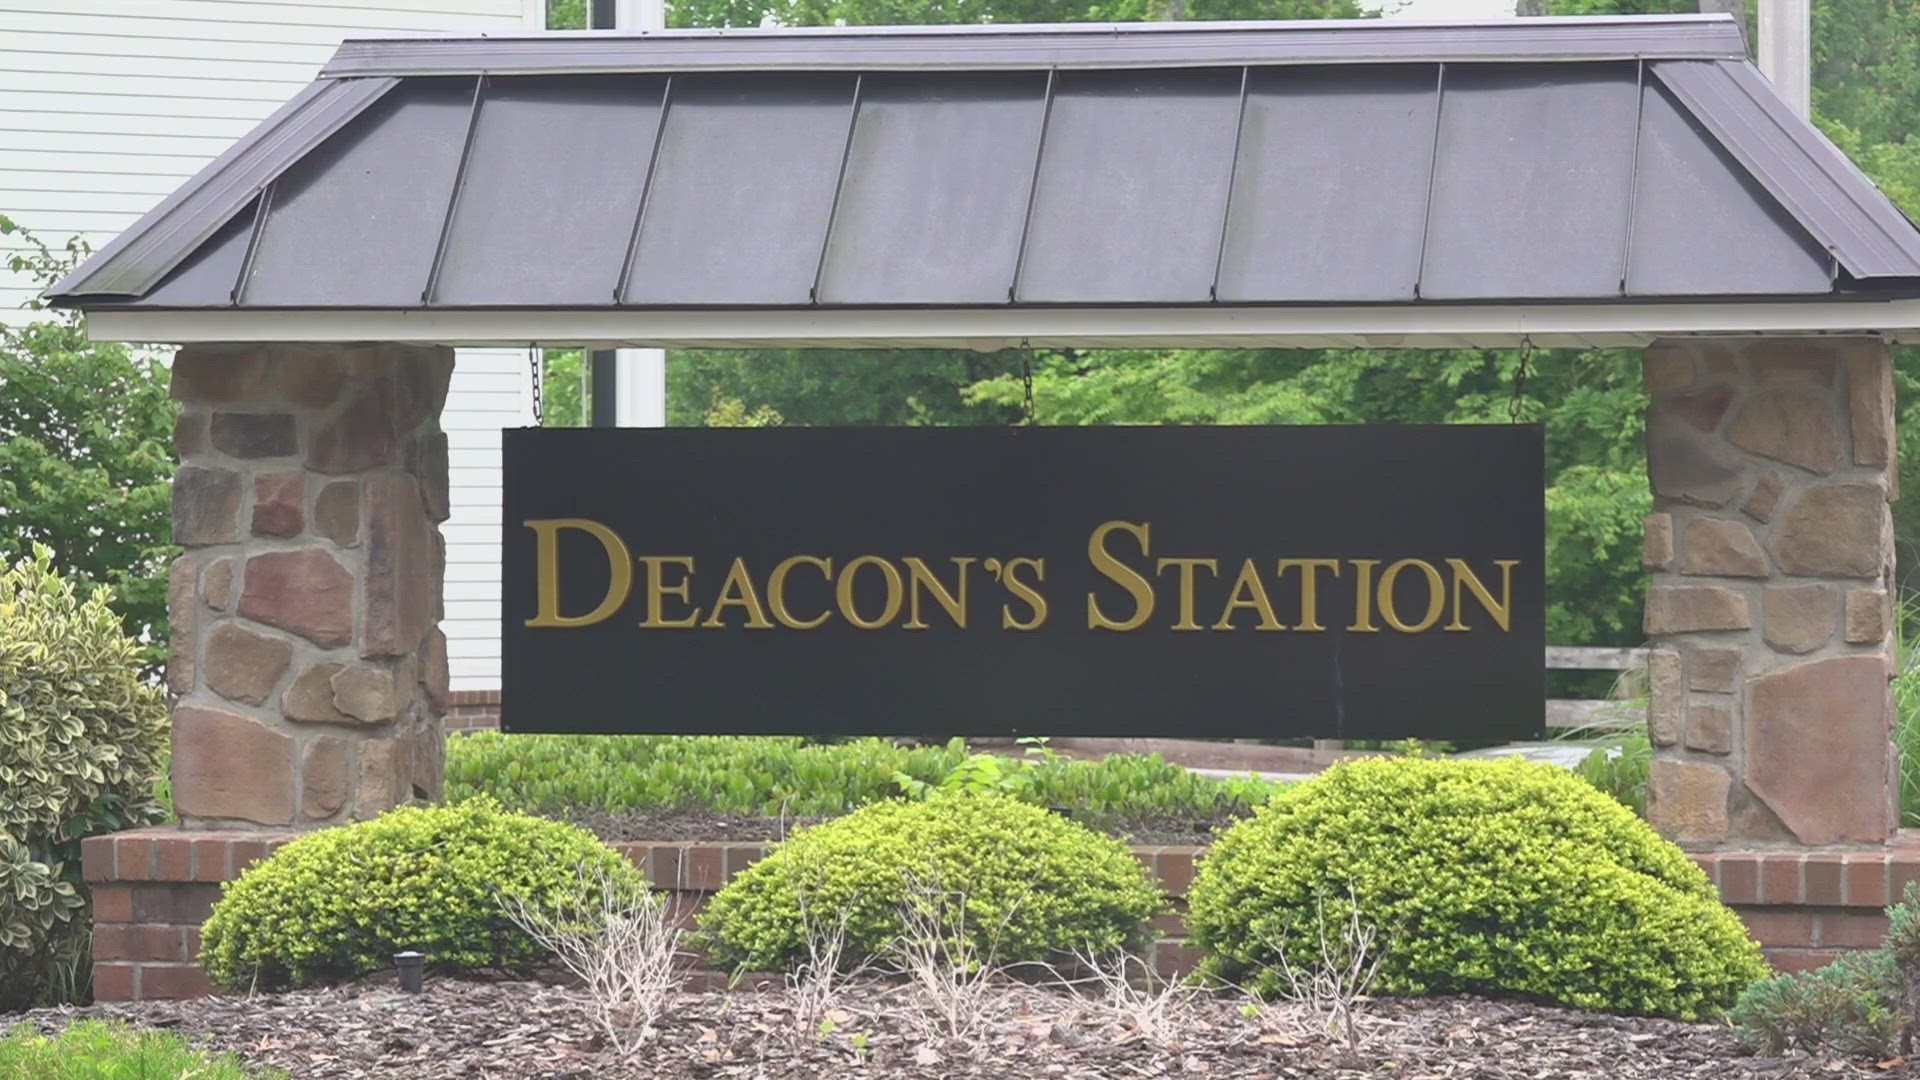 Police said a 21-year-old was killed during a robbery at Deacon Station.